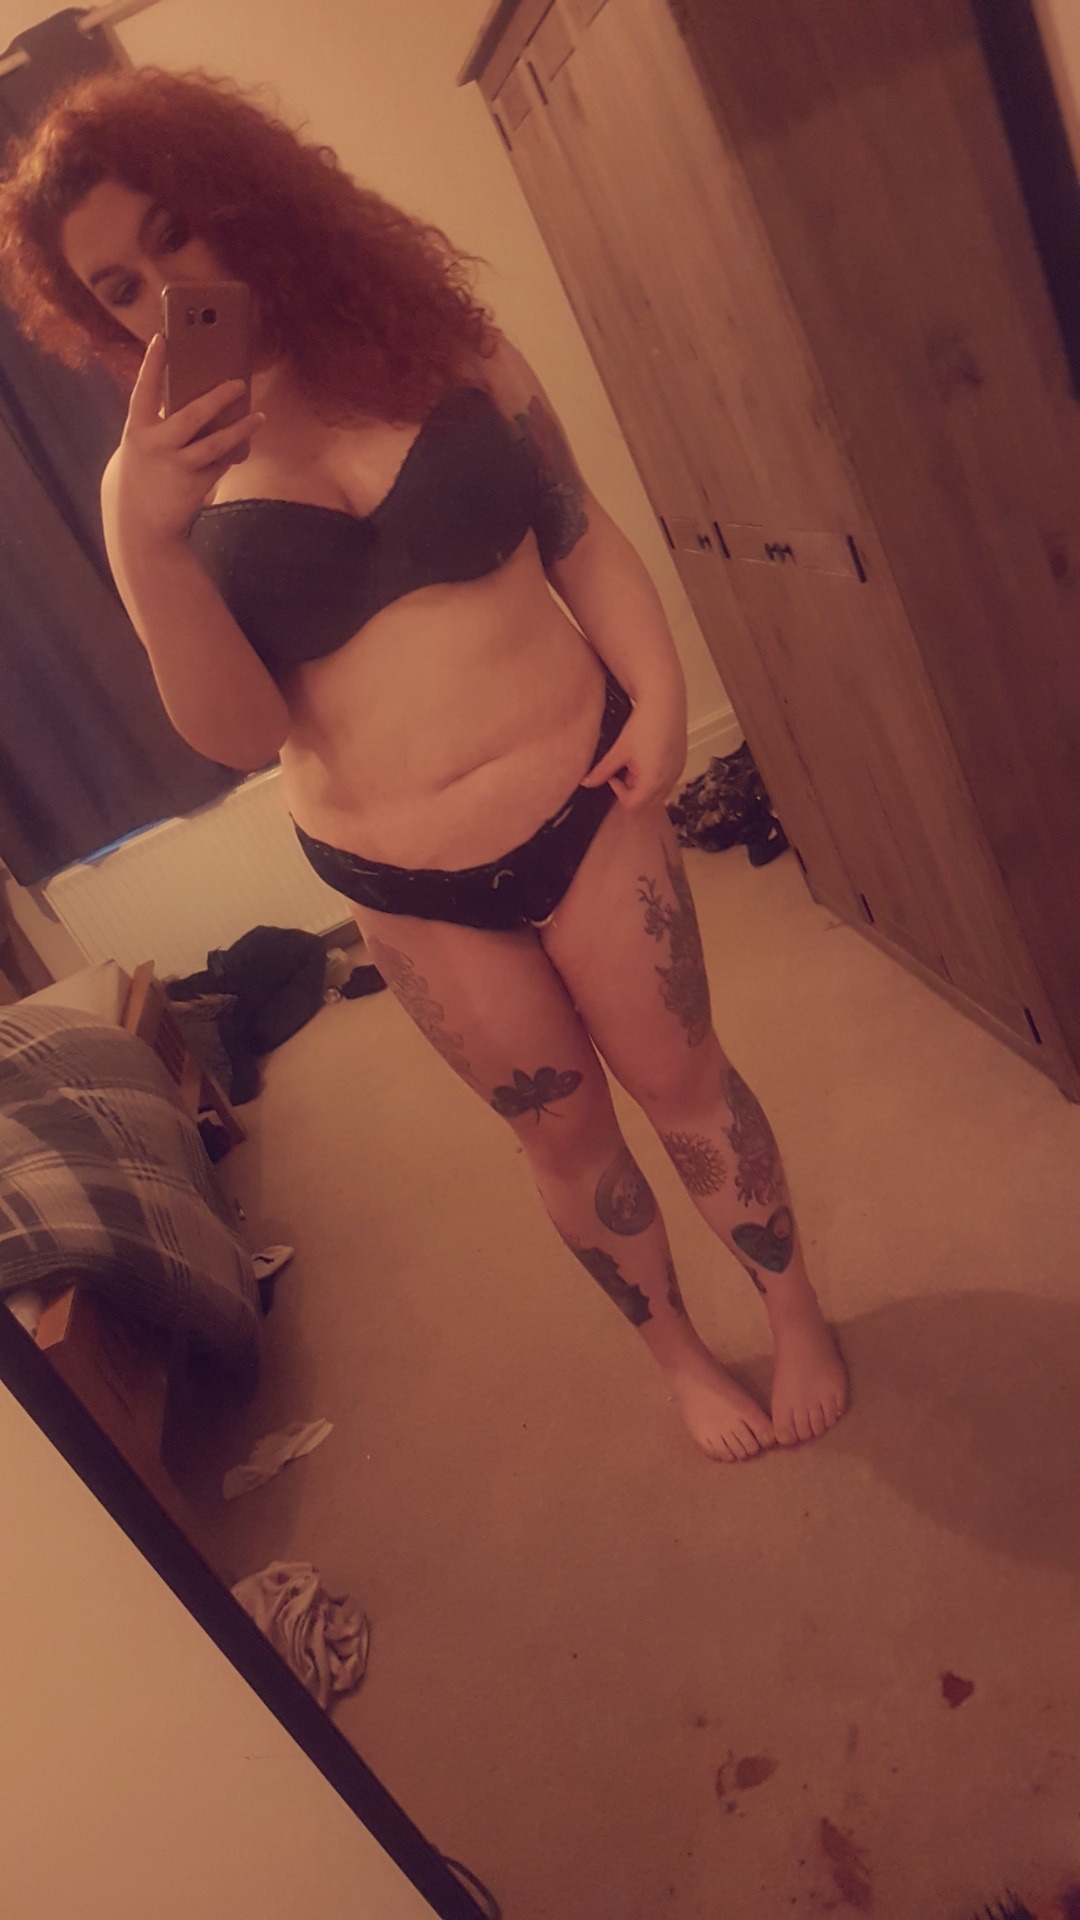 living-with-li0ns:Currently working my ass off to be less fat. I have always yoyo’